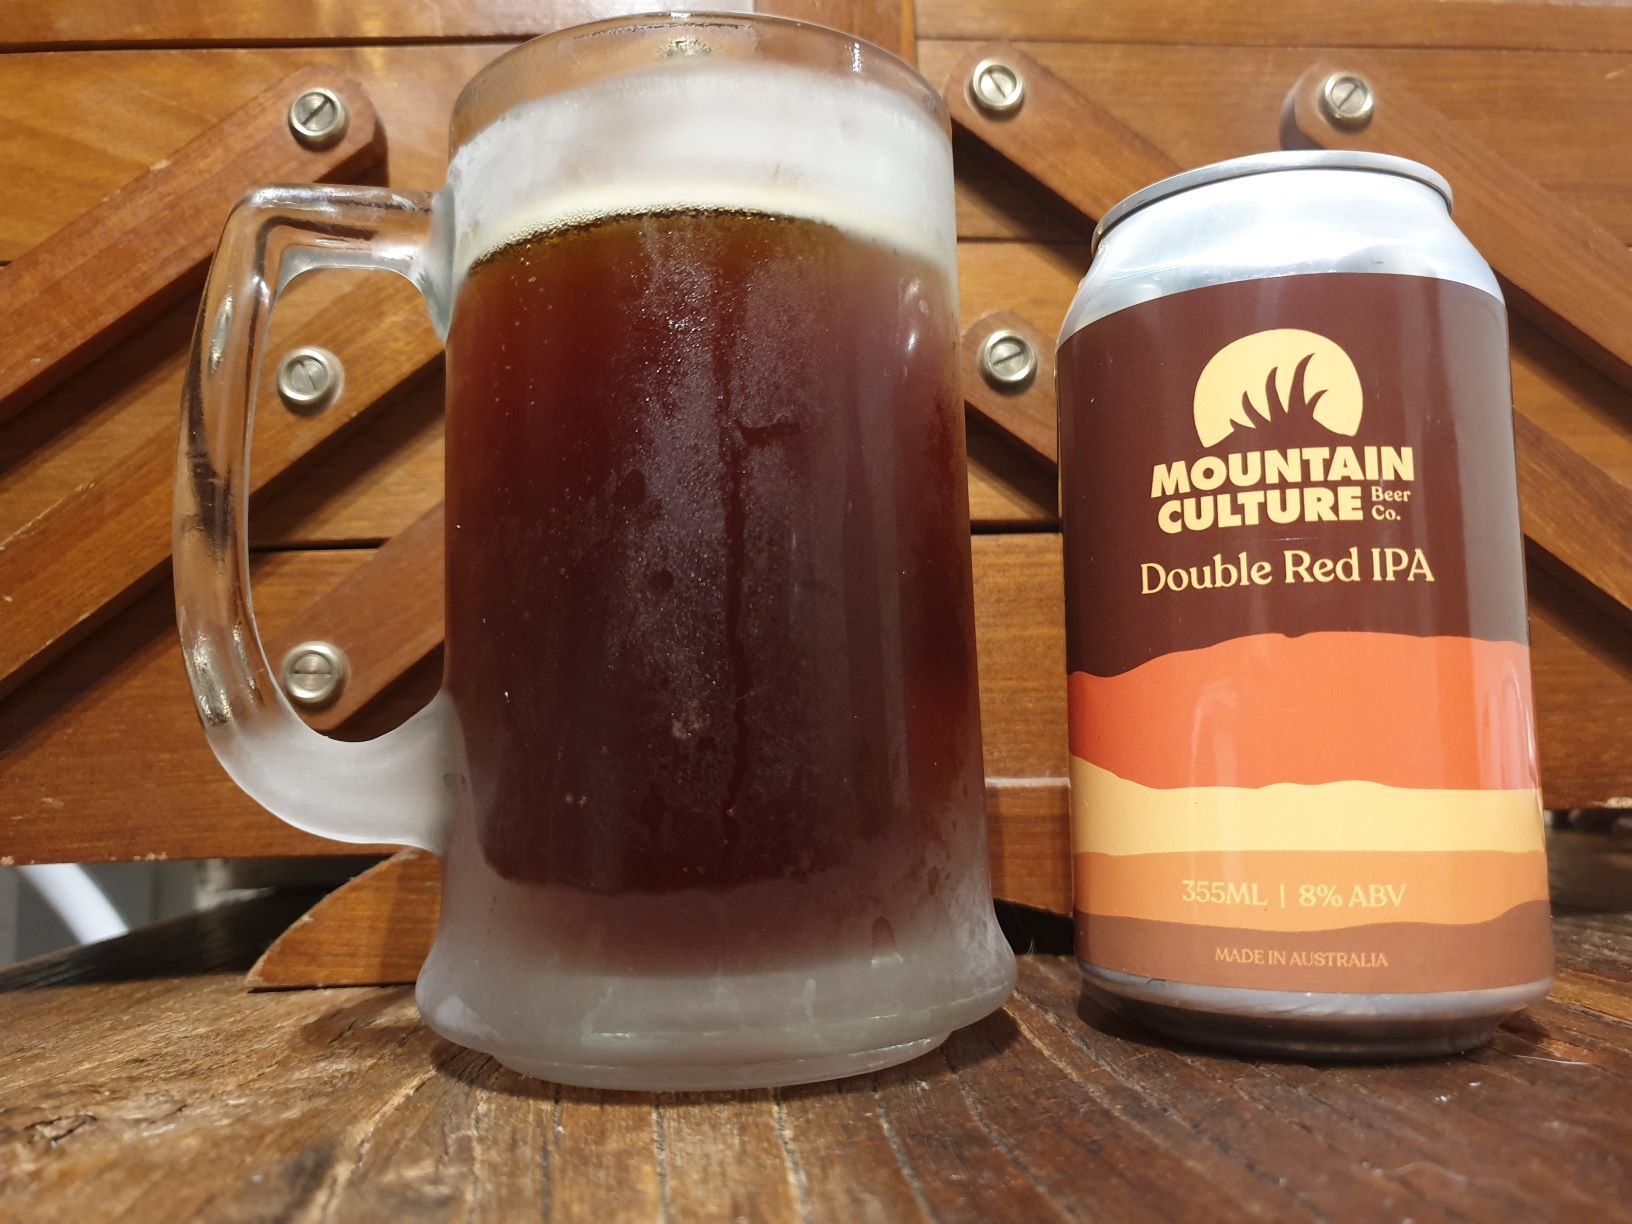 Double Red IPA by Mountain Culture